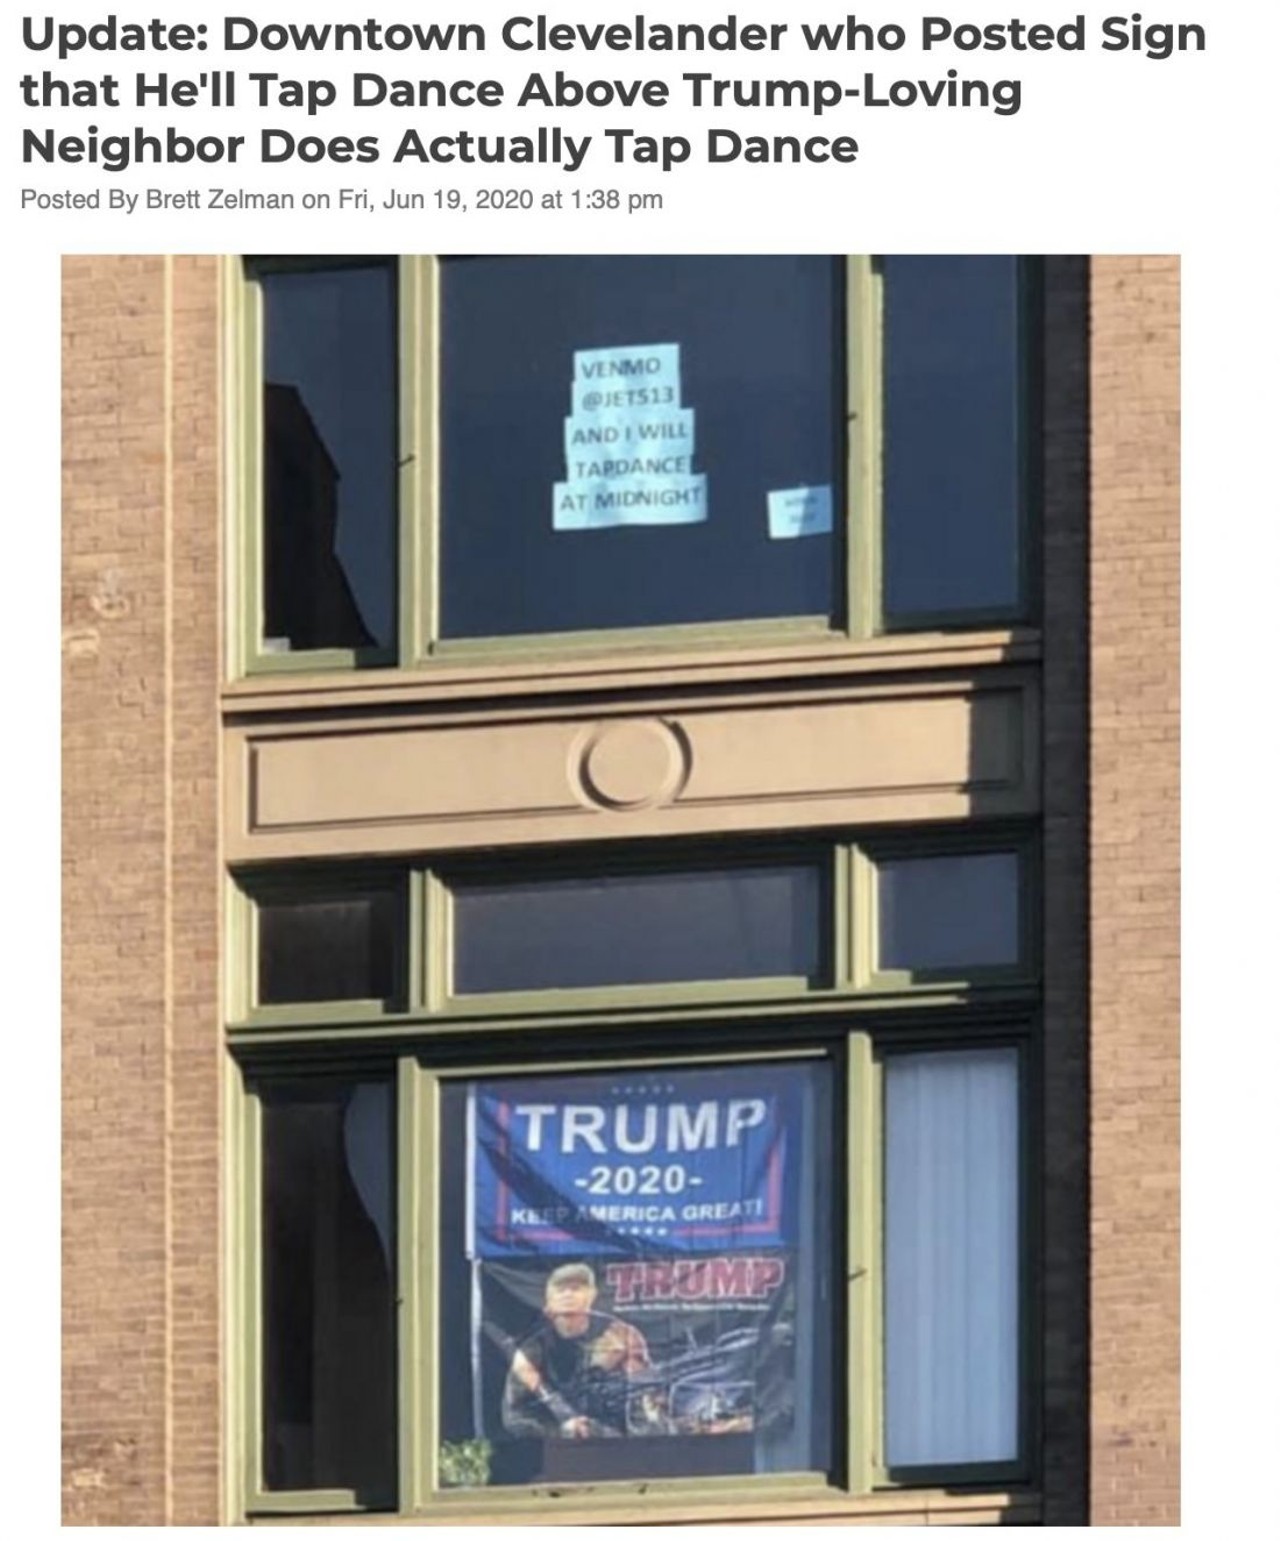  &#147;Downtown Clevelander who Posted Sign that He'll Tap Dance Above Trump-Loving Neighbor Does Actually Tap Dance&#148;
June 19th
&#147;Croisant told Scene that the money strangers are Venmo-ing him will be donated to the ACLU. Already he has received approximately $25,000 in donations. Today, Croisant also received by mail a pair of tap shoes. He put them on, invited some friends over and danced.&#146;&#148;
Photo via Scene Archives